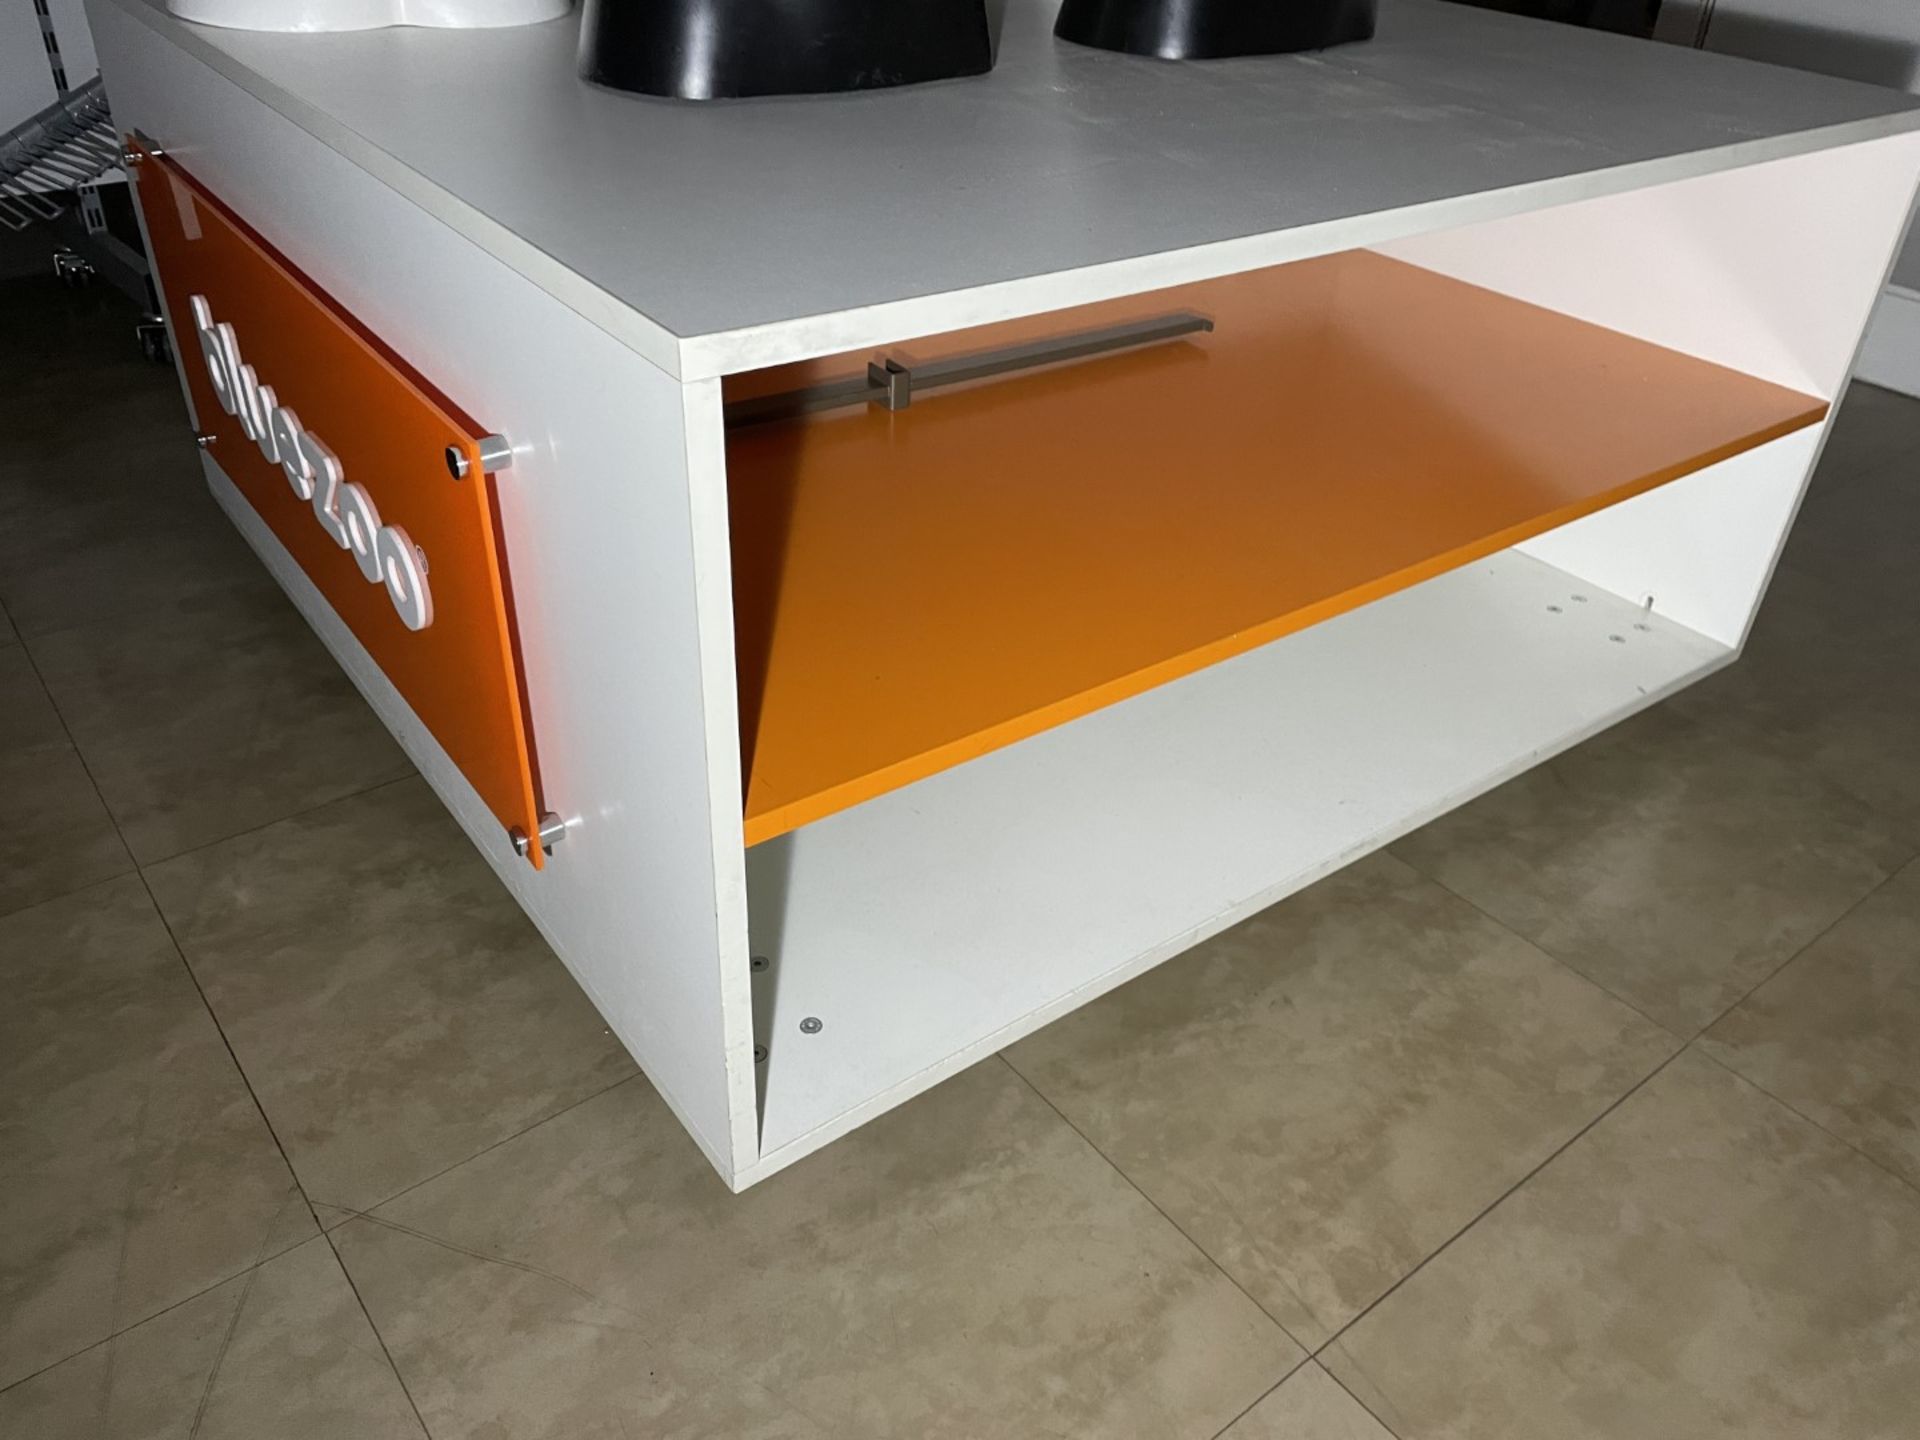 1 x Bluezoo Retail Display Table With Shelf Storage Plus 5 Mannequin Torsos - CL670 - Ref: - Image 7 of 10